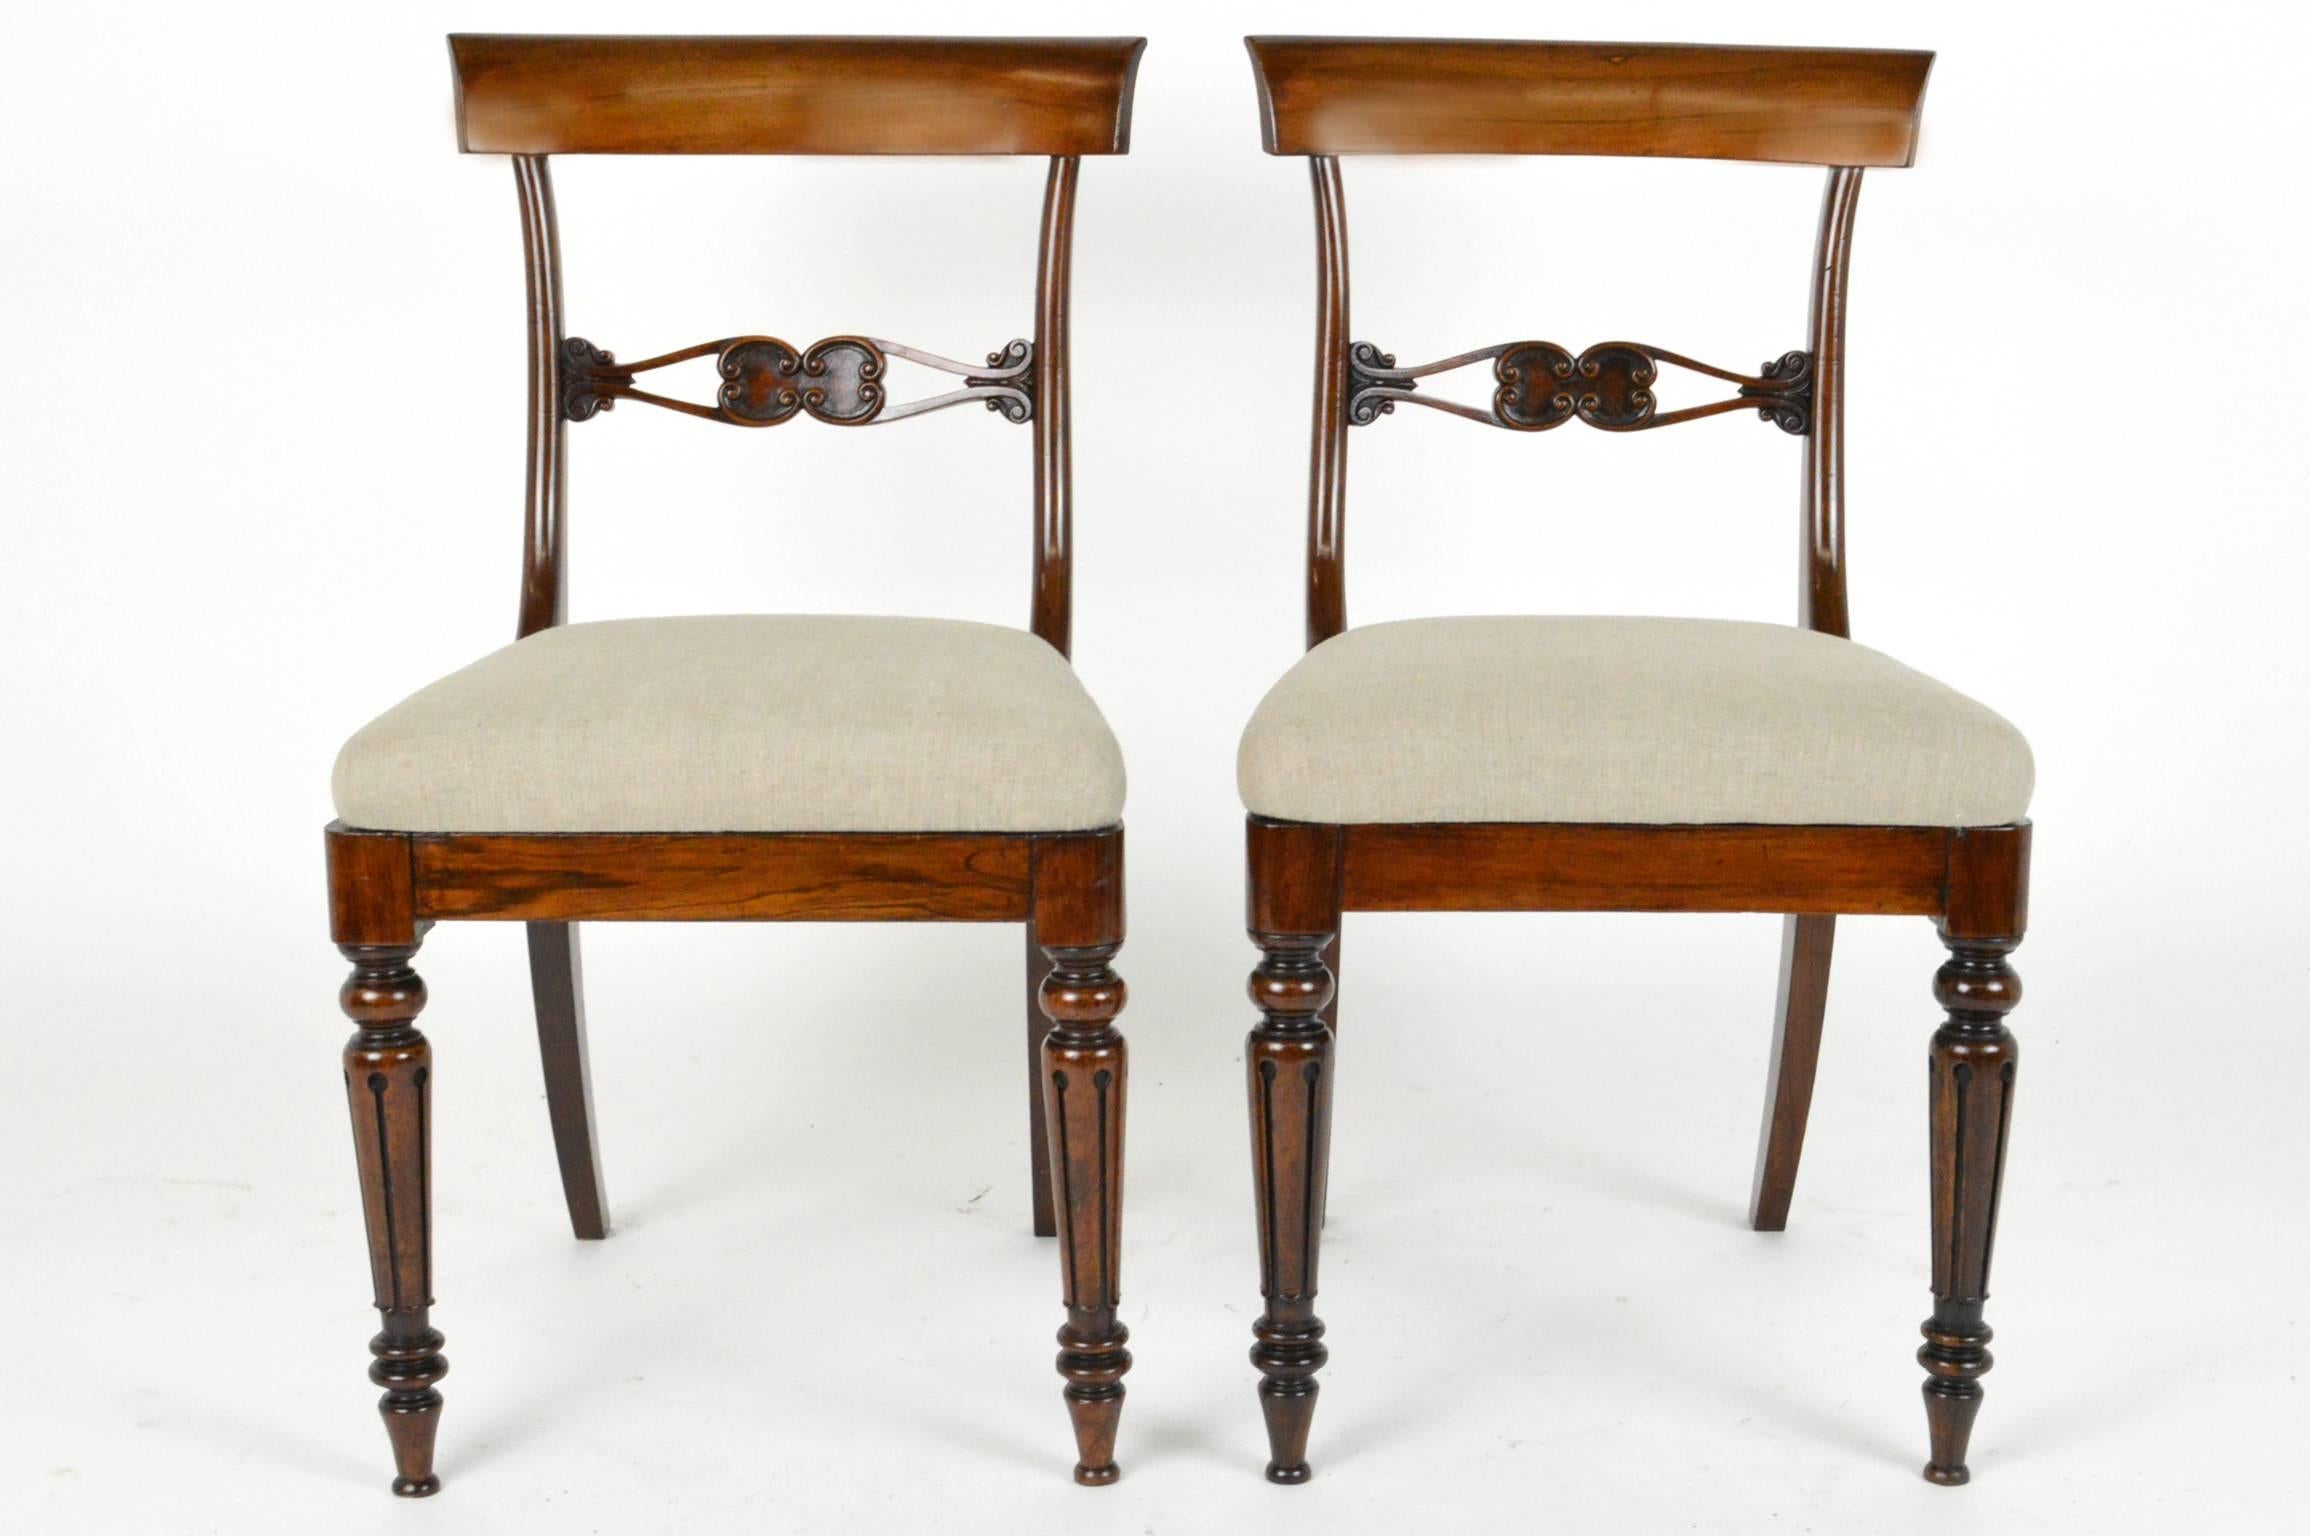 Set of four English Regency style rosewood dining chairs with intricately carved double loop mid rail above linen upholstered seat on turned fluted form front legs.